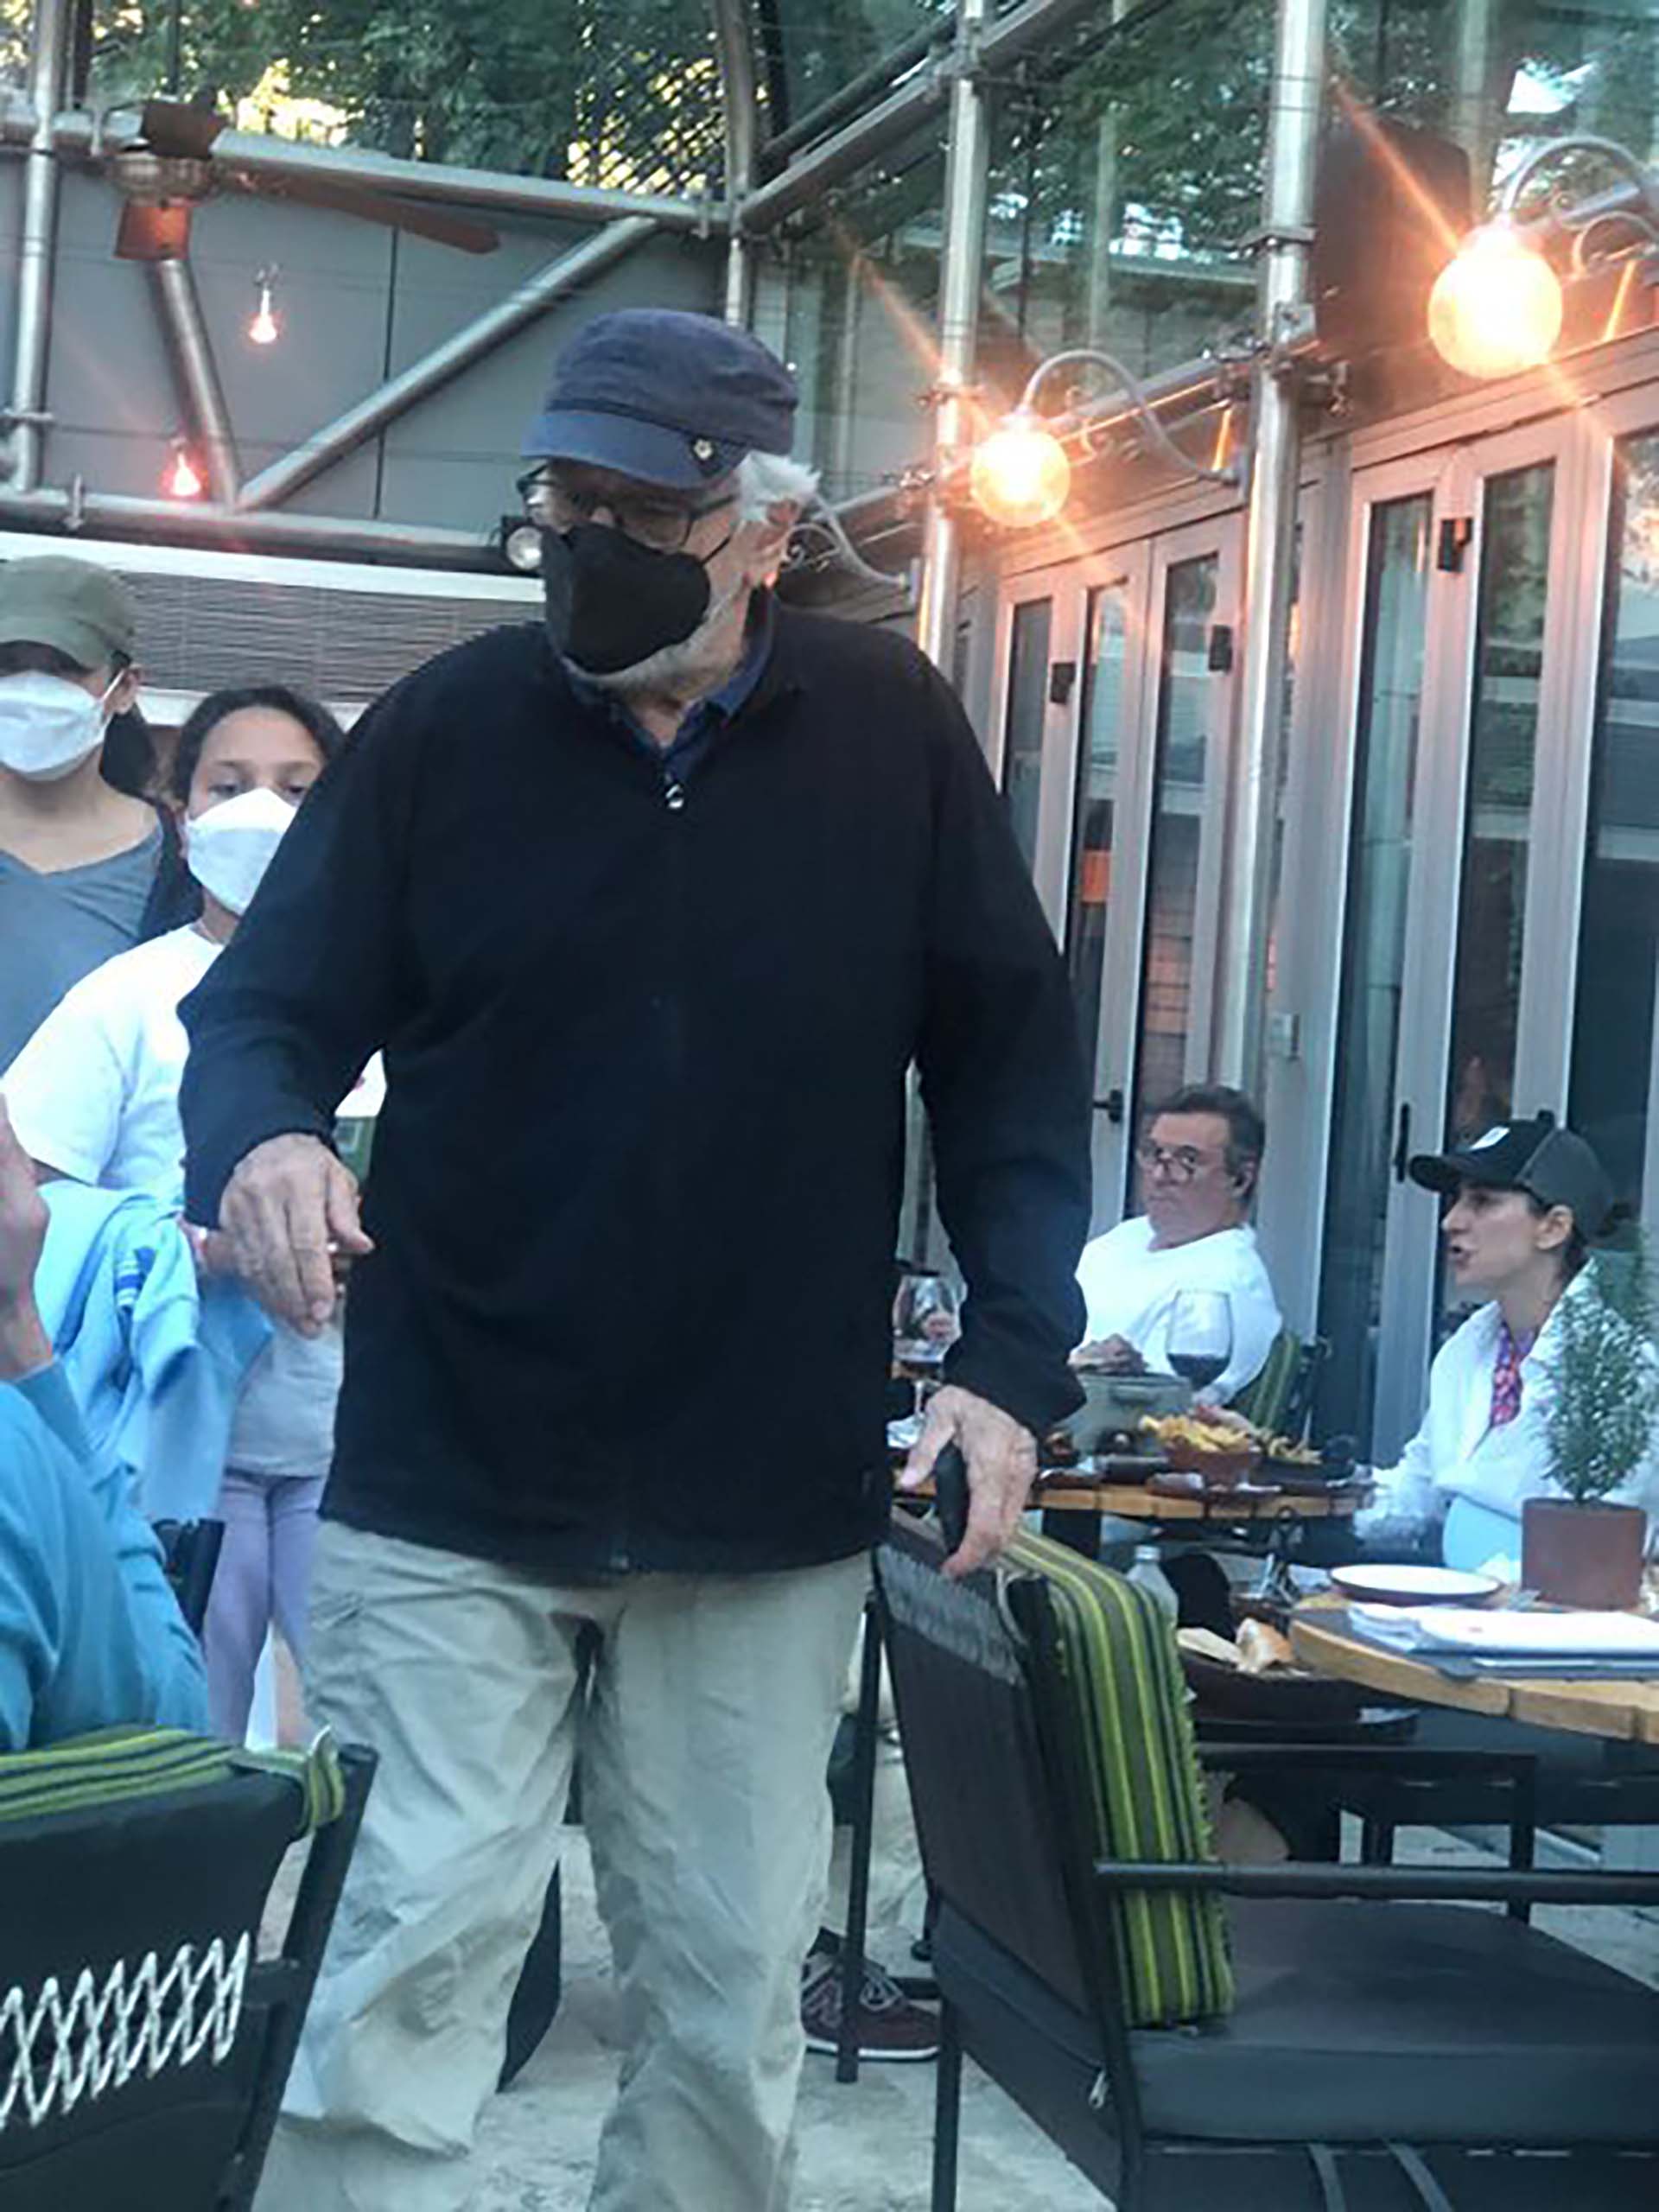 Robert De Niro arriving with his family at Our Secret Grill (@garay39466678)